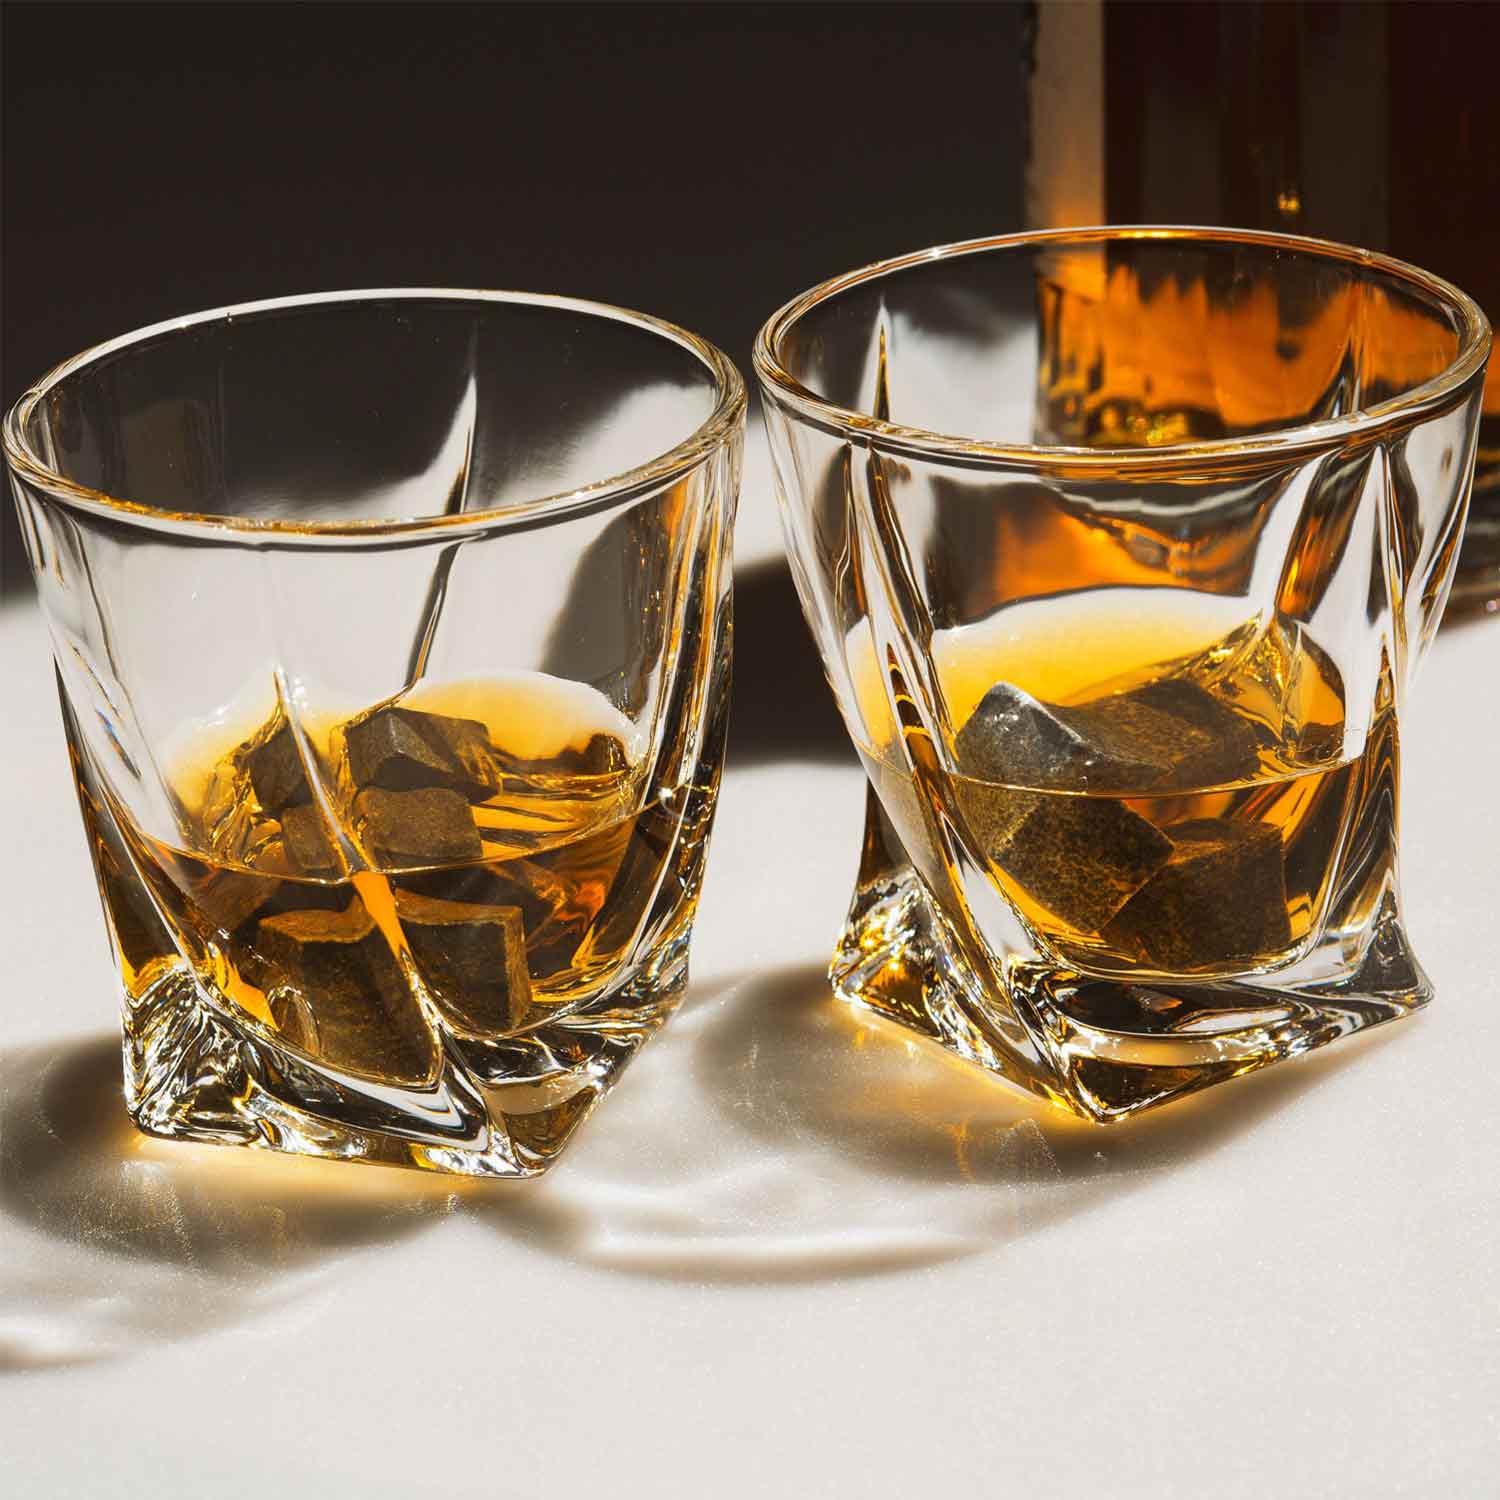 https://sunnygeeks.com/wp-content/uploads/2023/05/whiskey-glasses-with-ice-rocks-3.jpg